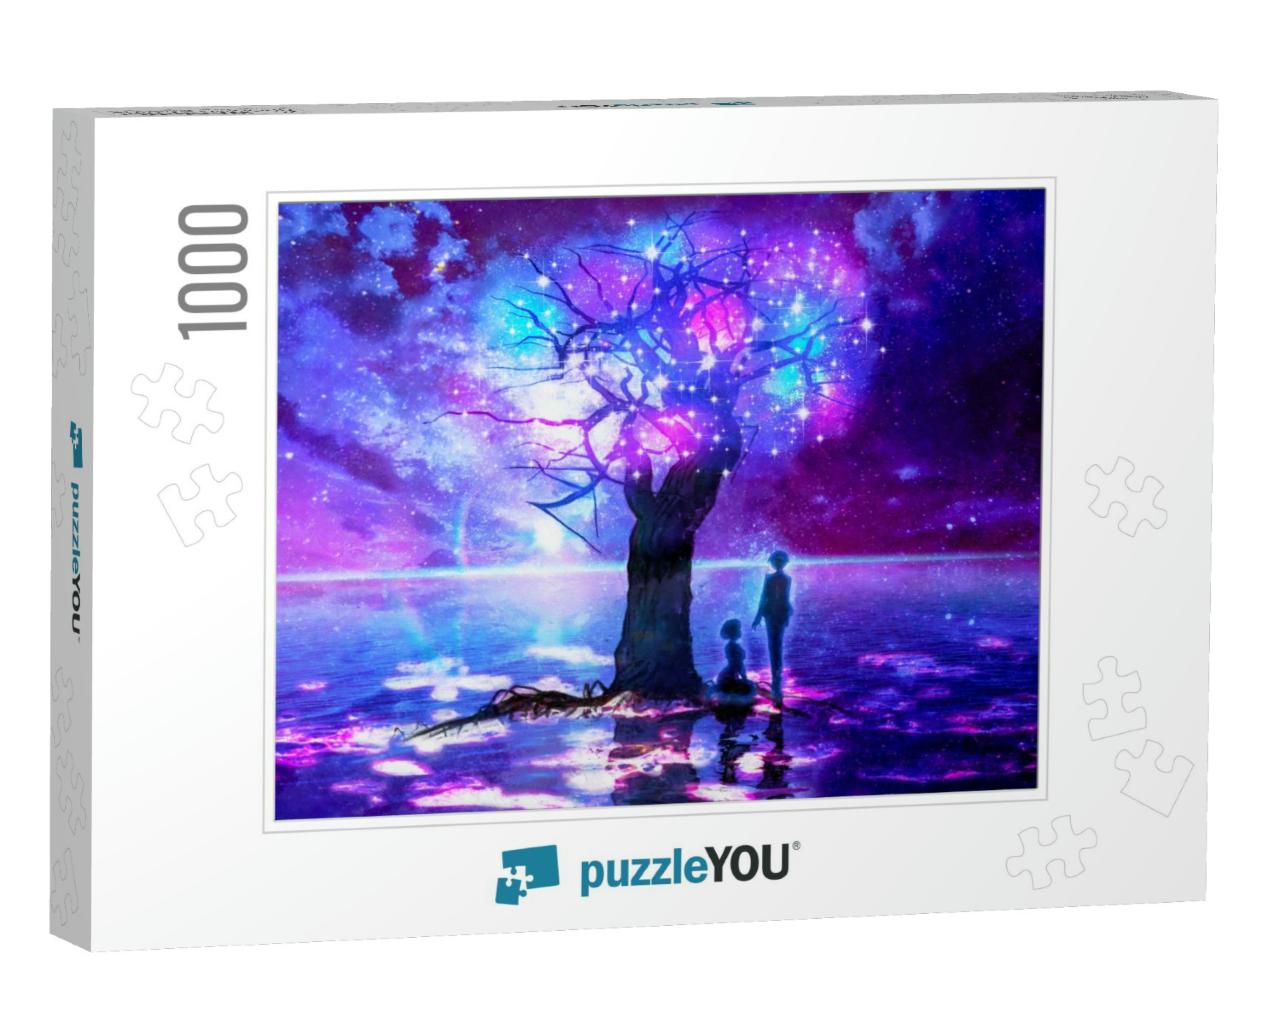 Digital Watercolor Illustration of a Magic Tree Made of S... Jigsaw Puzzle with 1000 pieces